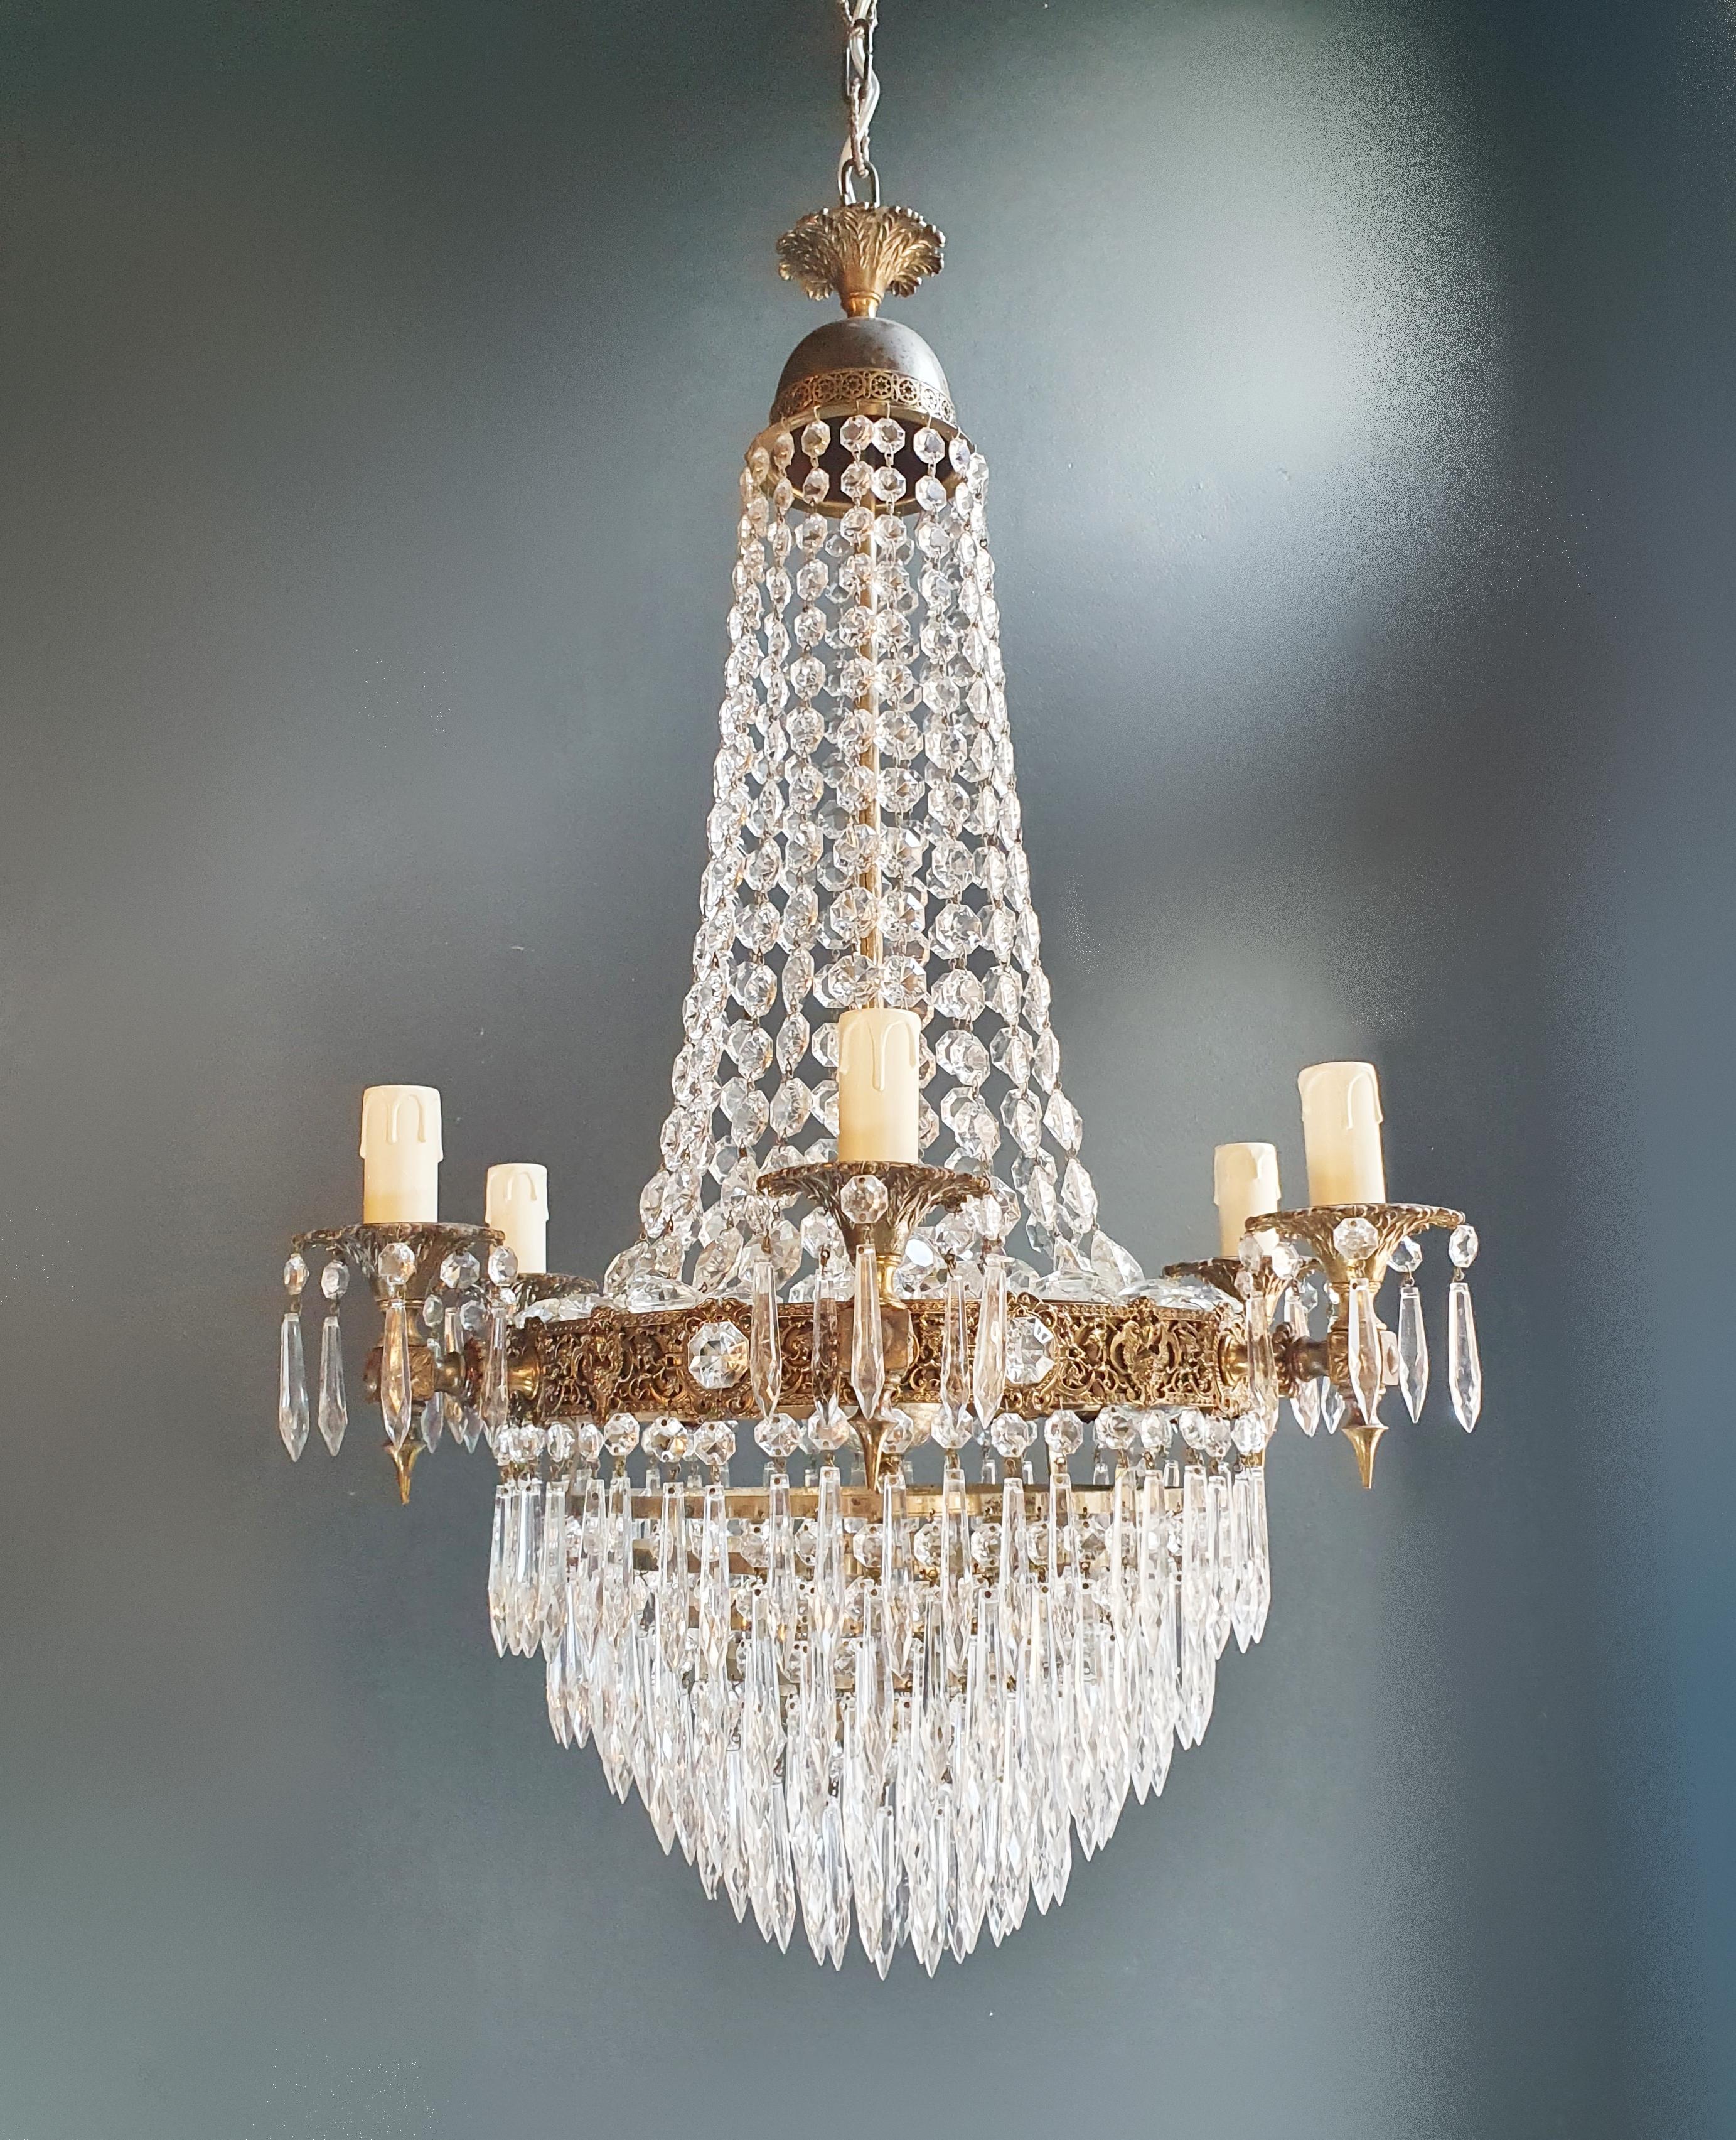 Hand-Knotted Empire Brass Sac a Pearl Chandelier Crystal Lustre Ceiling Antique